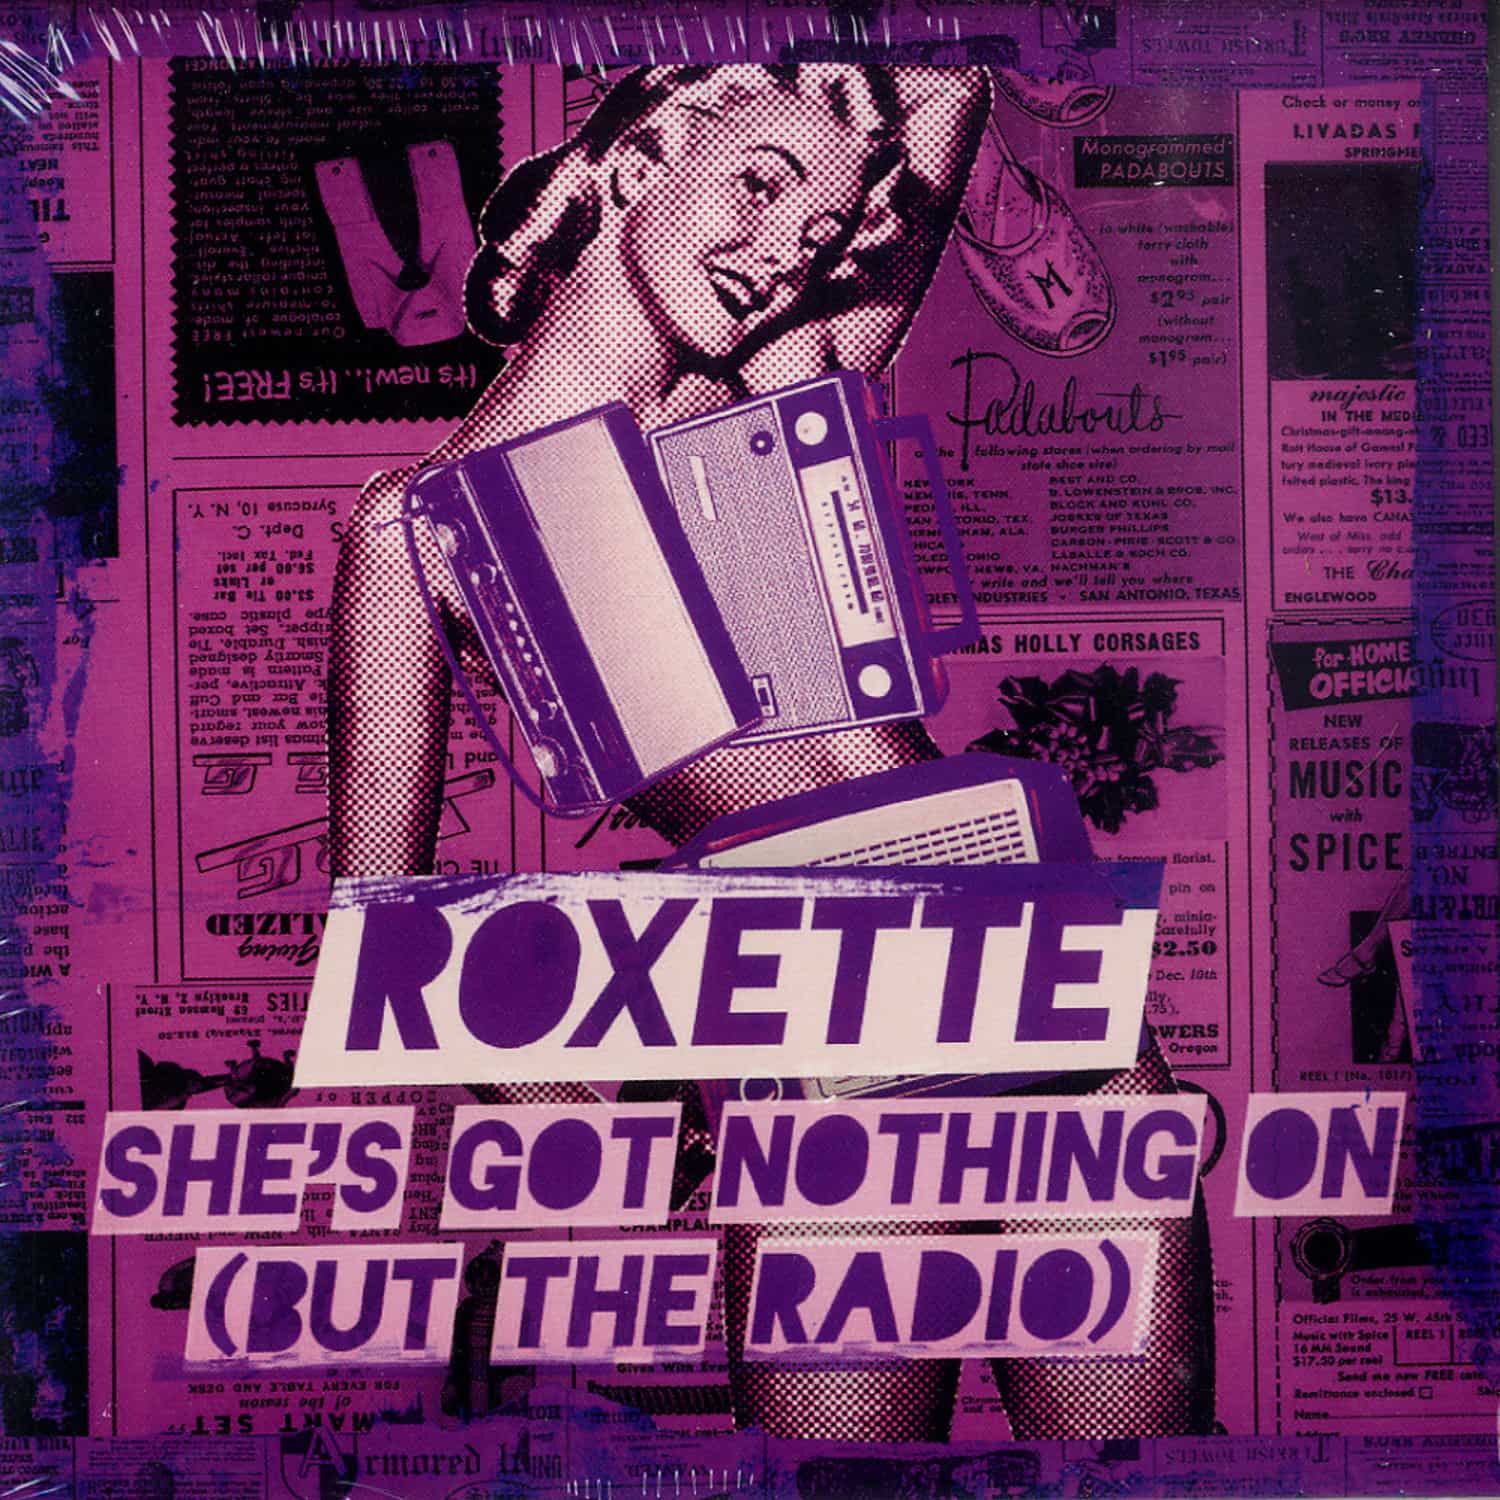 Roxette - SHES GOT NOTHING ON 